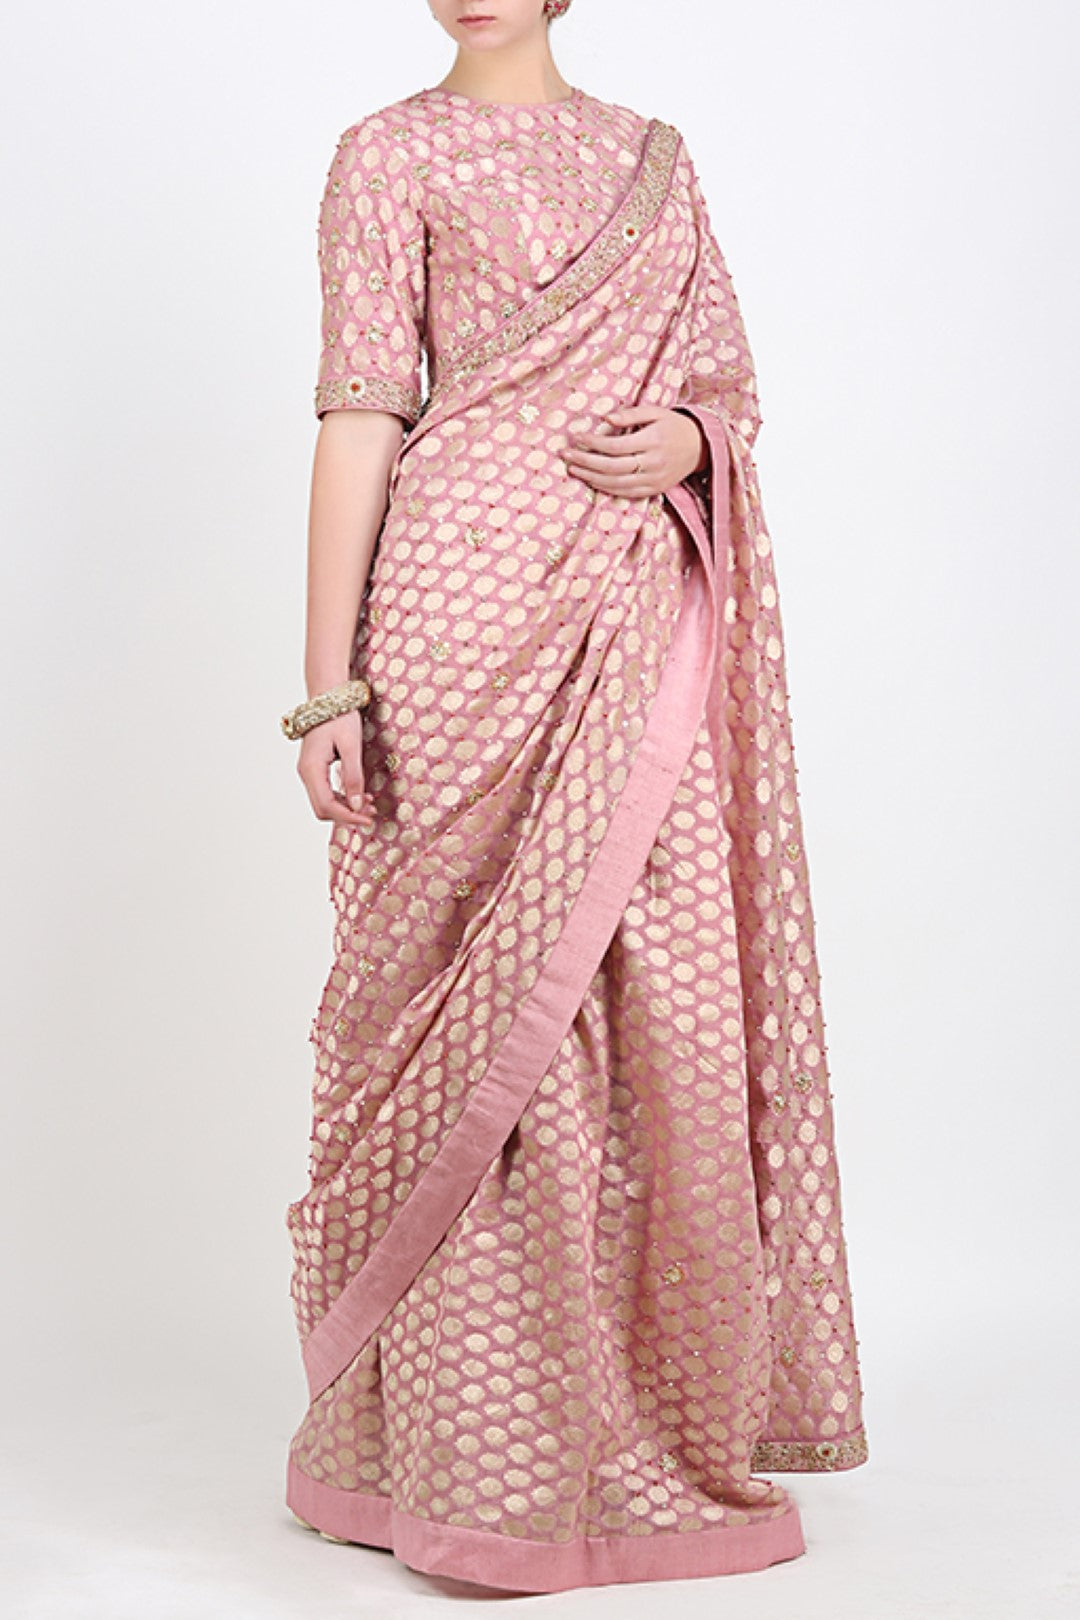 LAVENDER BROCADE EMBROIDERED SARI WITH EMBROIDERED BLOUSE.